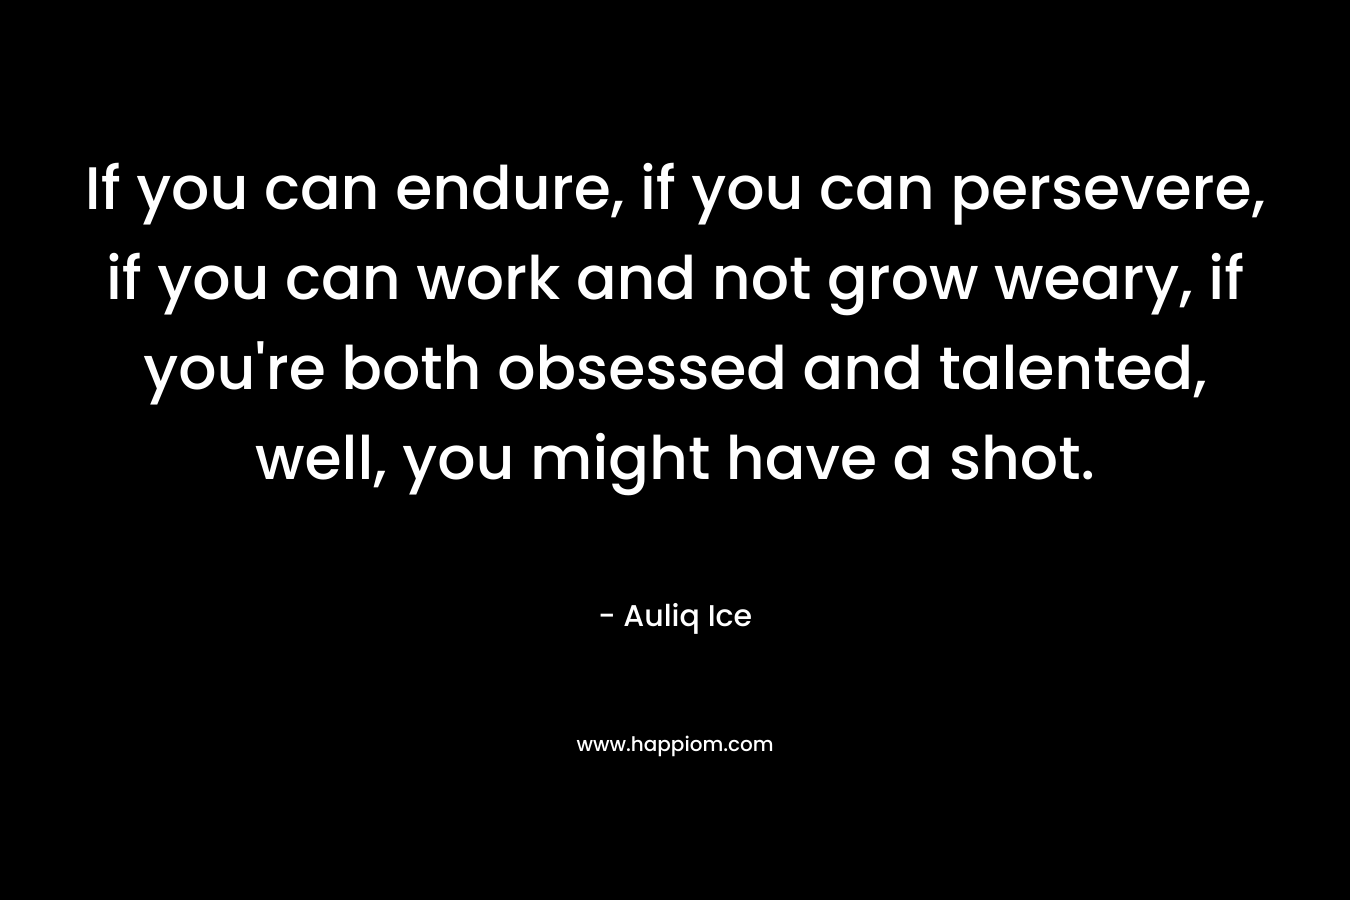 If you can endure, if you can persevere, if you can work and not grow weary, if you're both obsessed and talented, well, you might have a shot.